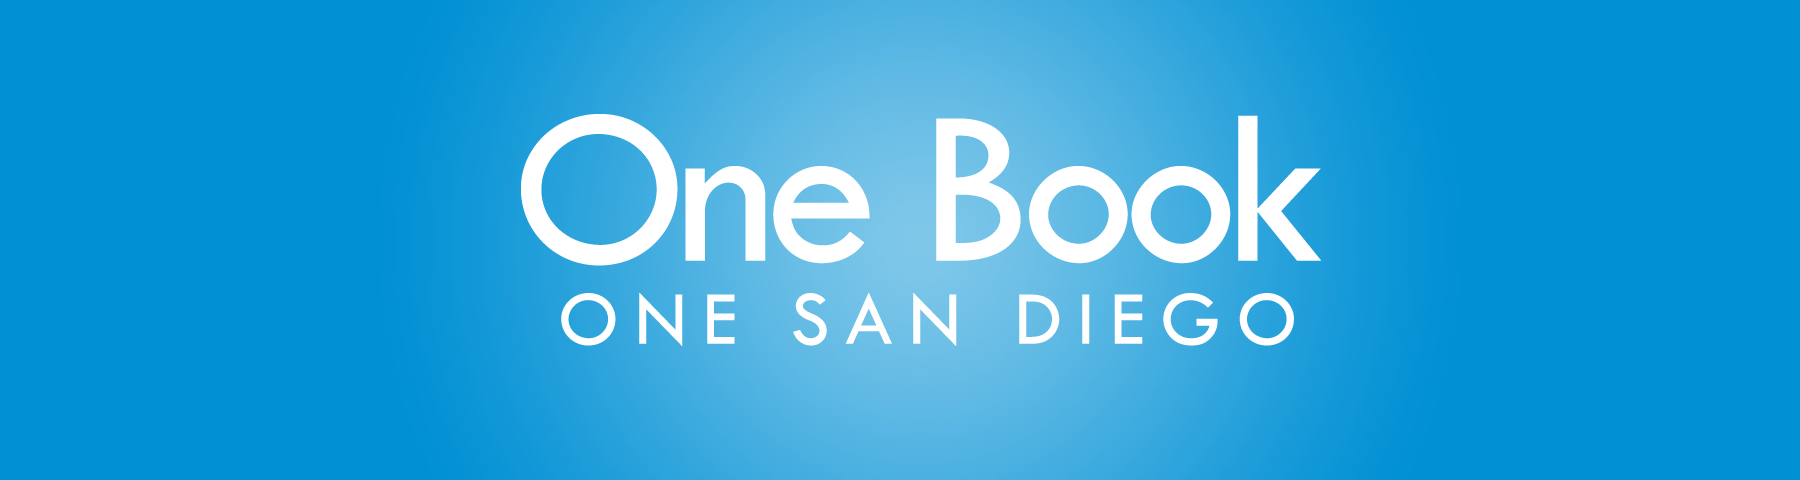 One Book One San Diego banner